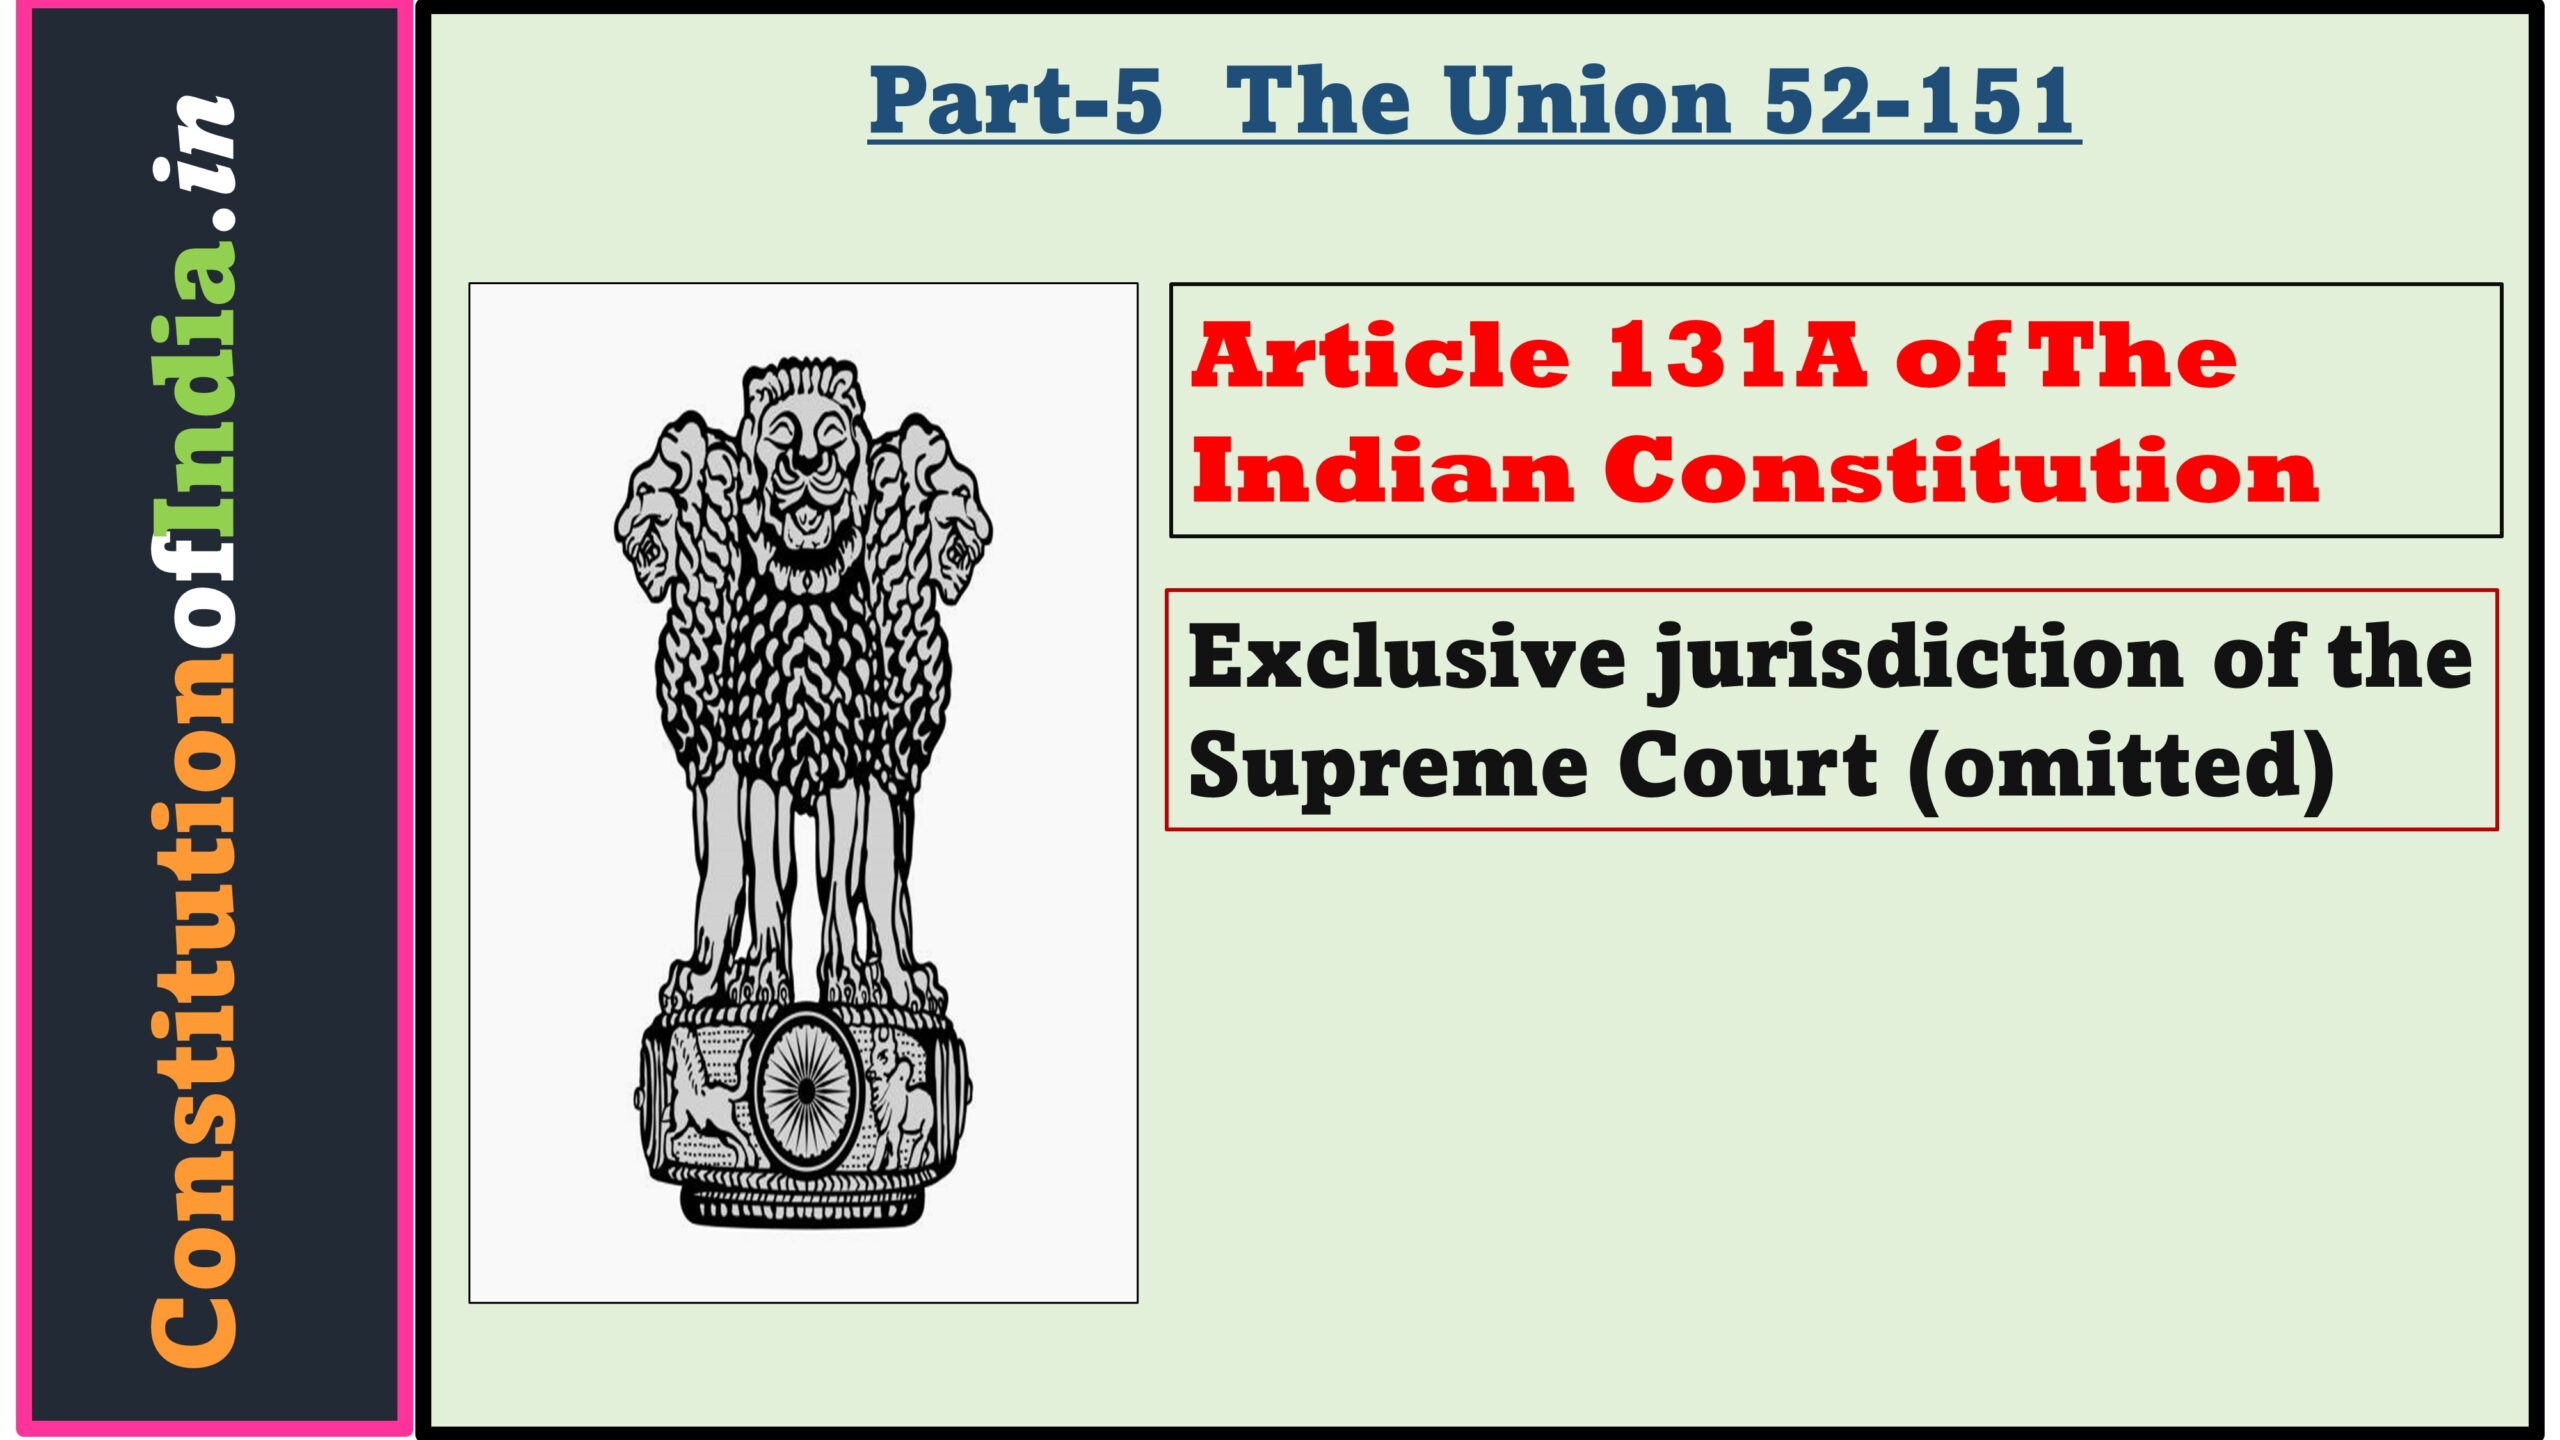 Article 131A of The Indian Constitution